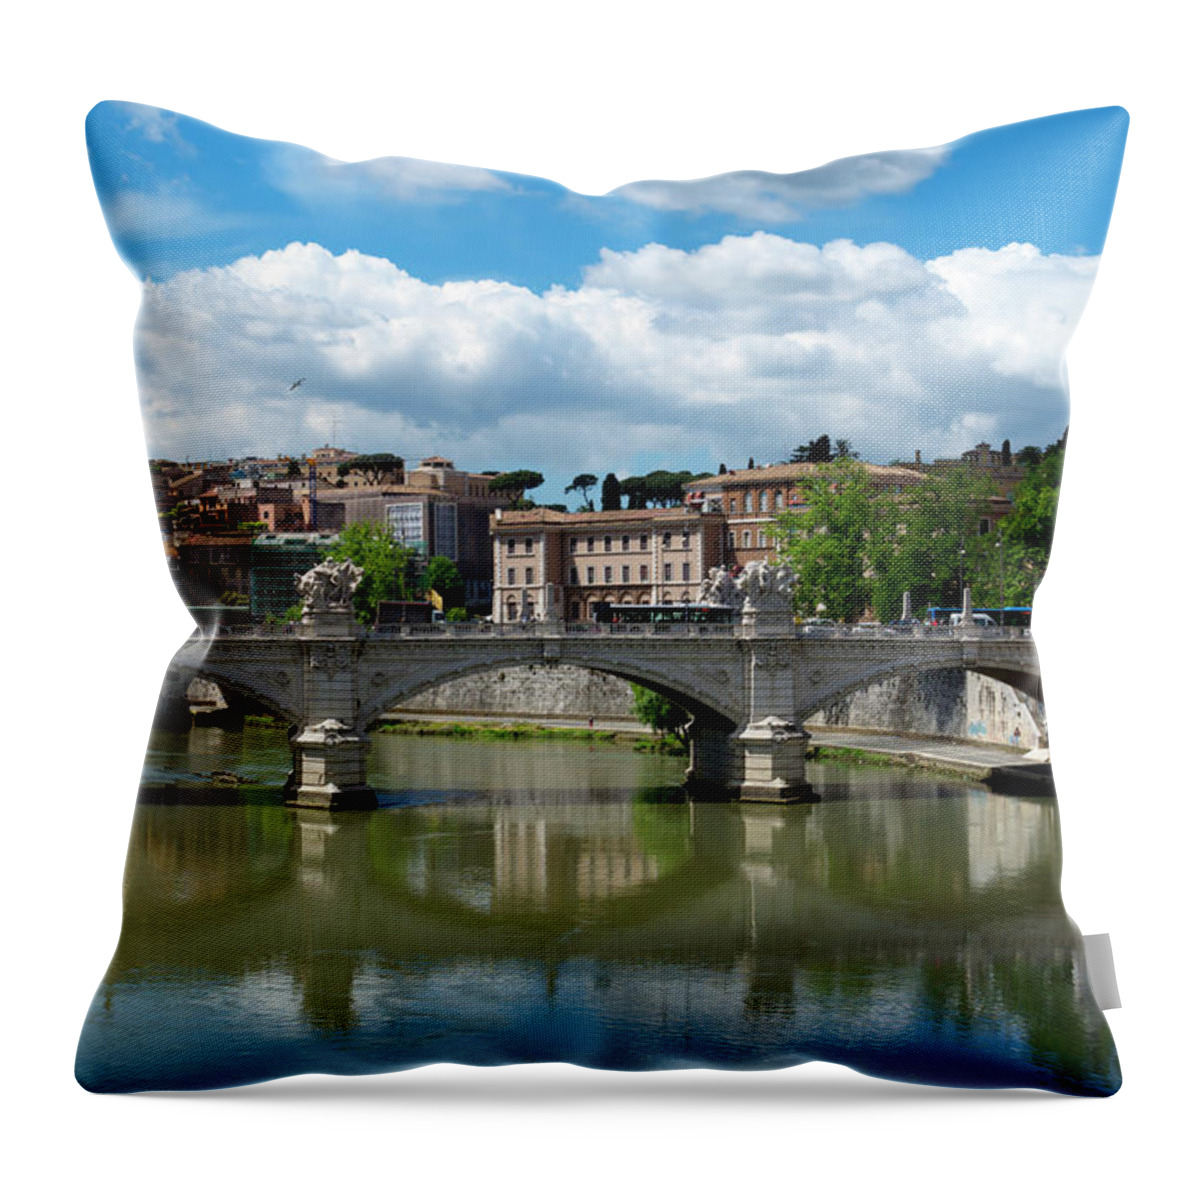 Tranquility Throw Pillow featuring the photograph Rome, The Bridge Of Hadrian by Joachim Messerschmidt